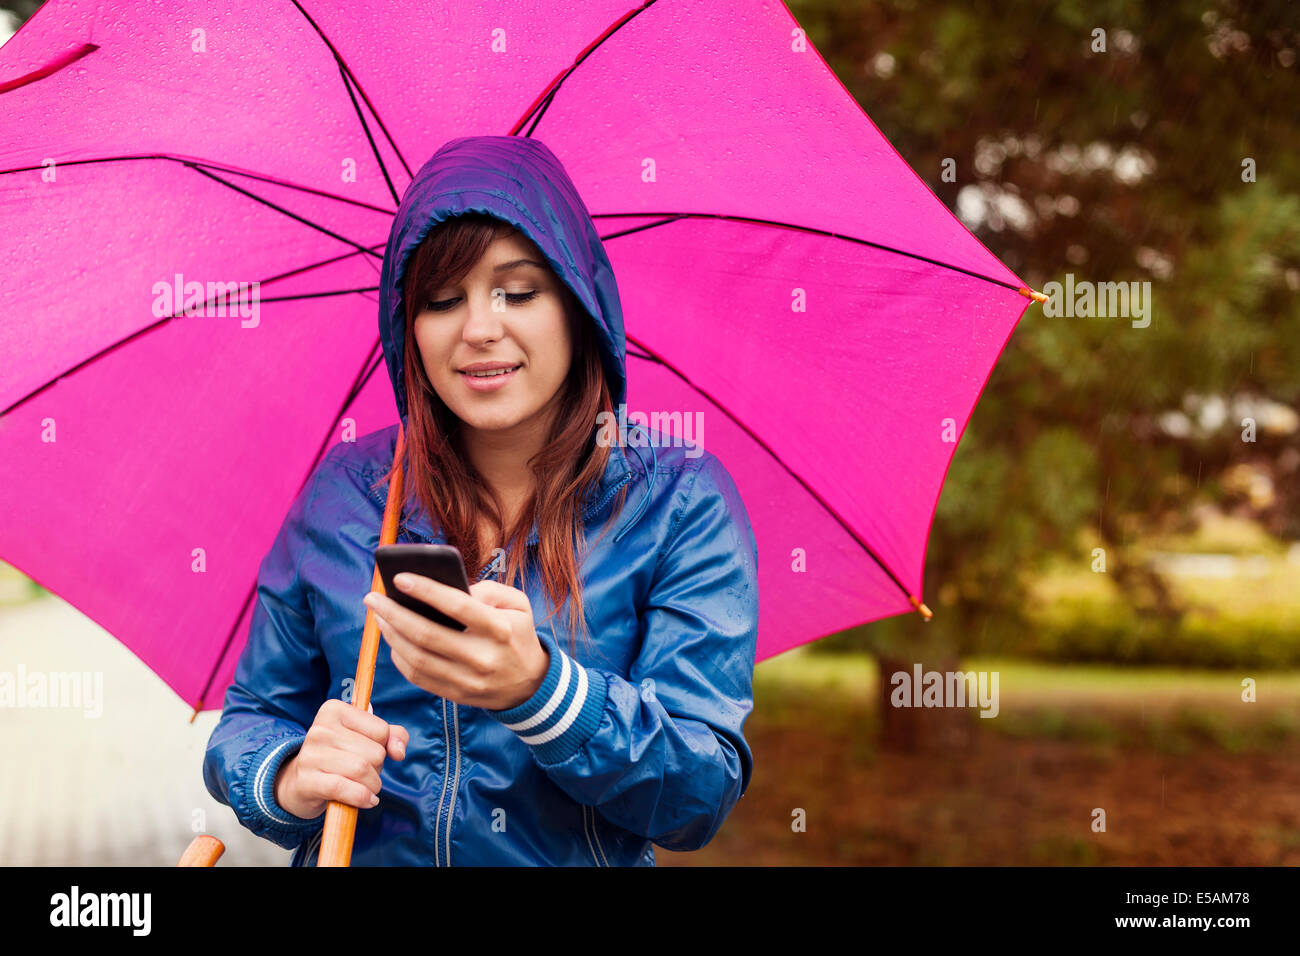 Young woman texting on mobile phone in the rain, Debica, Poland Stock Photo